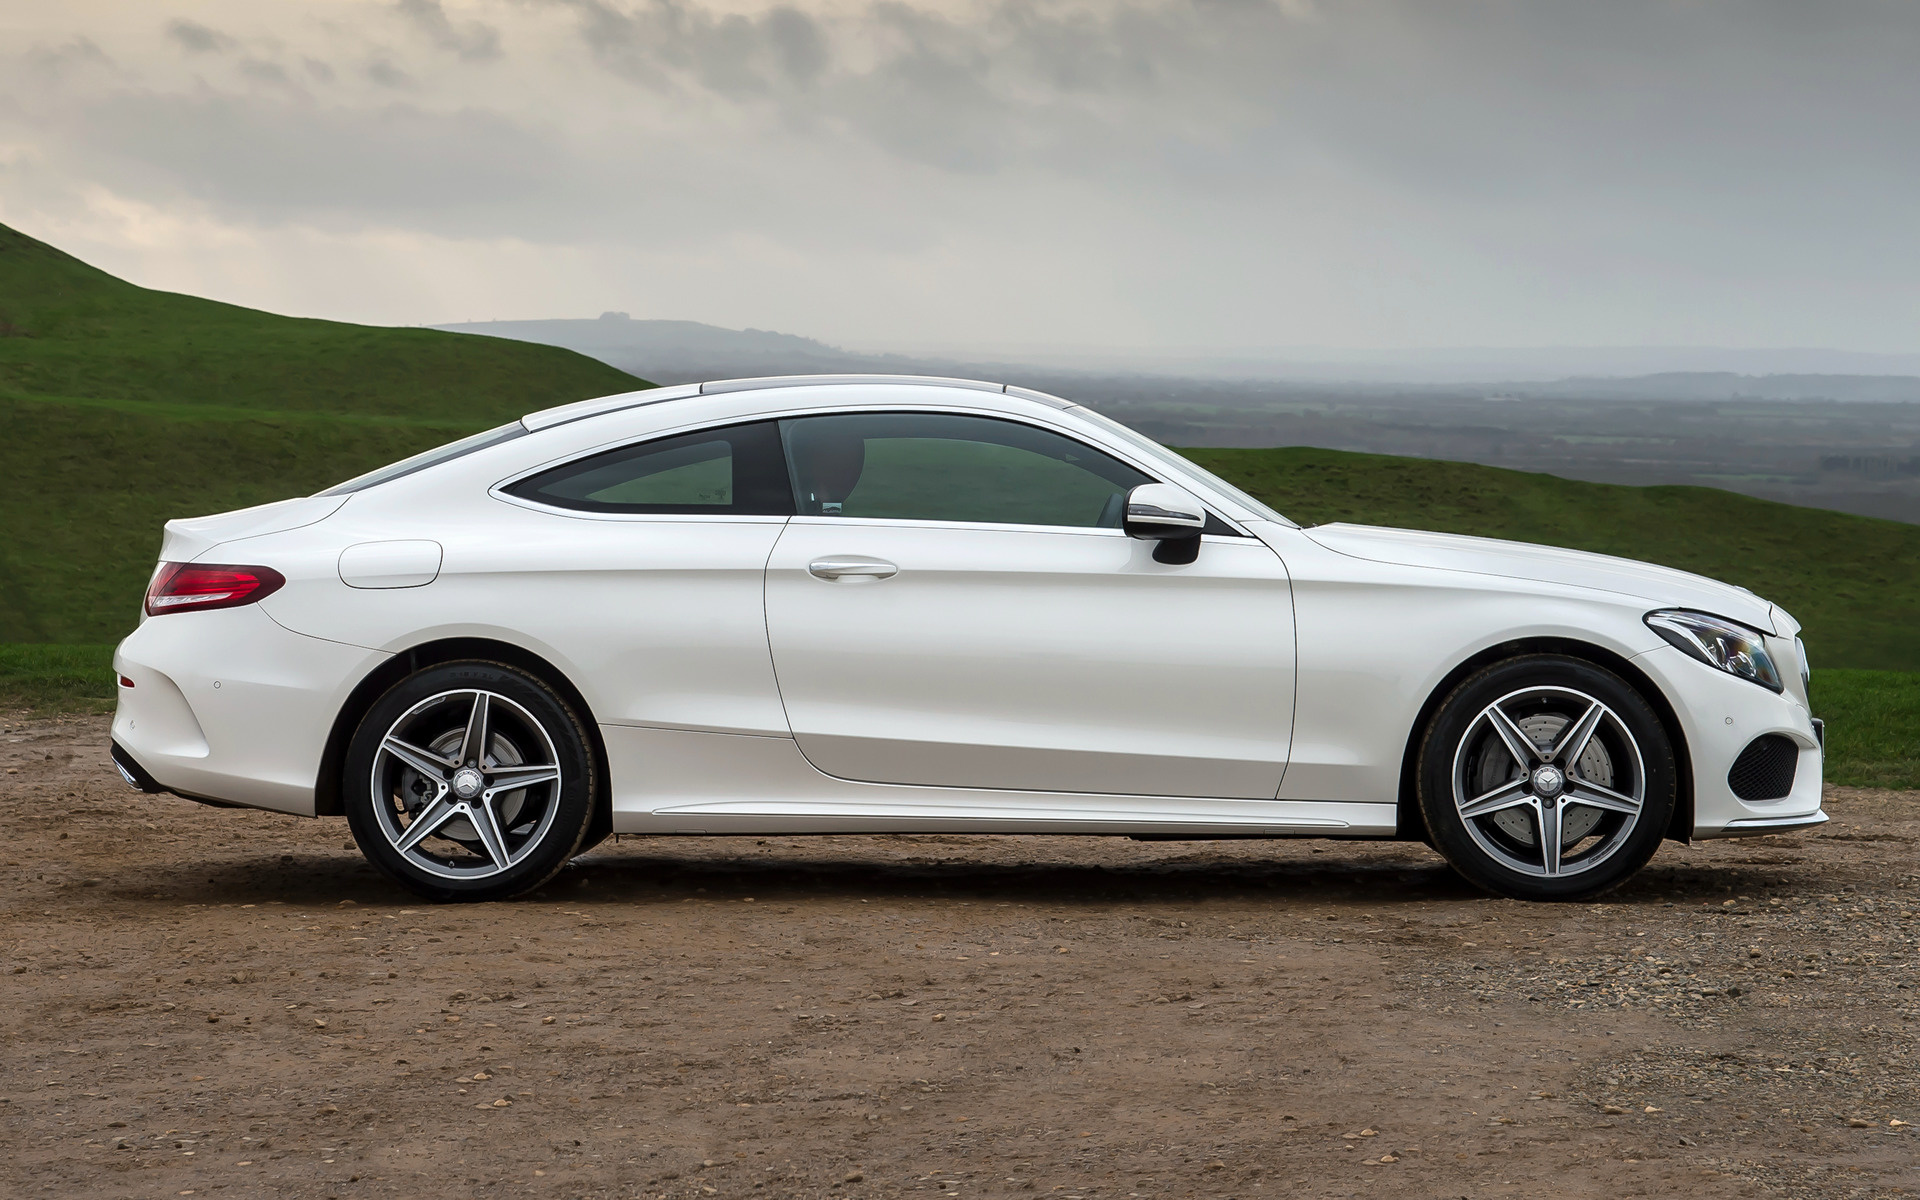 2015 Mercedes-Benz C-Class Coupe AMG Line (UK) - Wallpapers and HD Images | Car Pixel